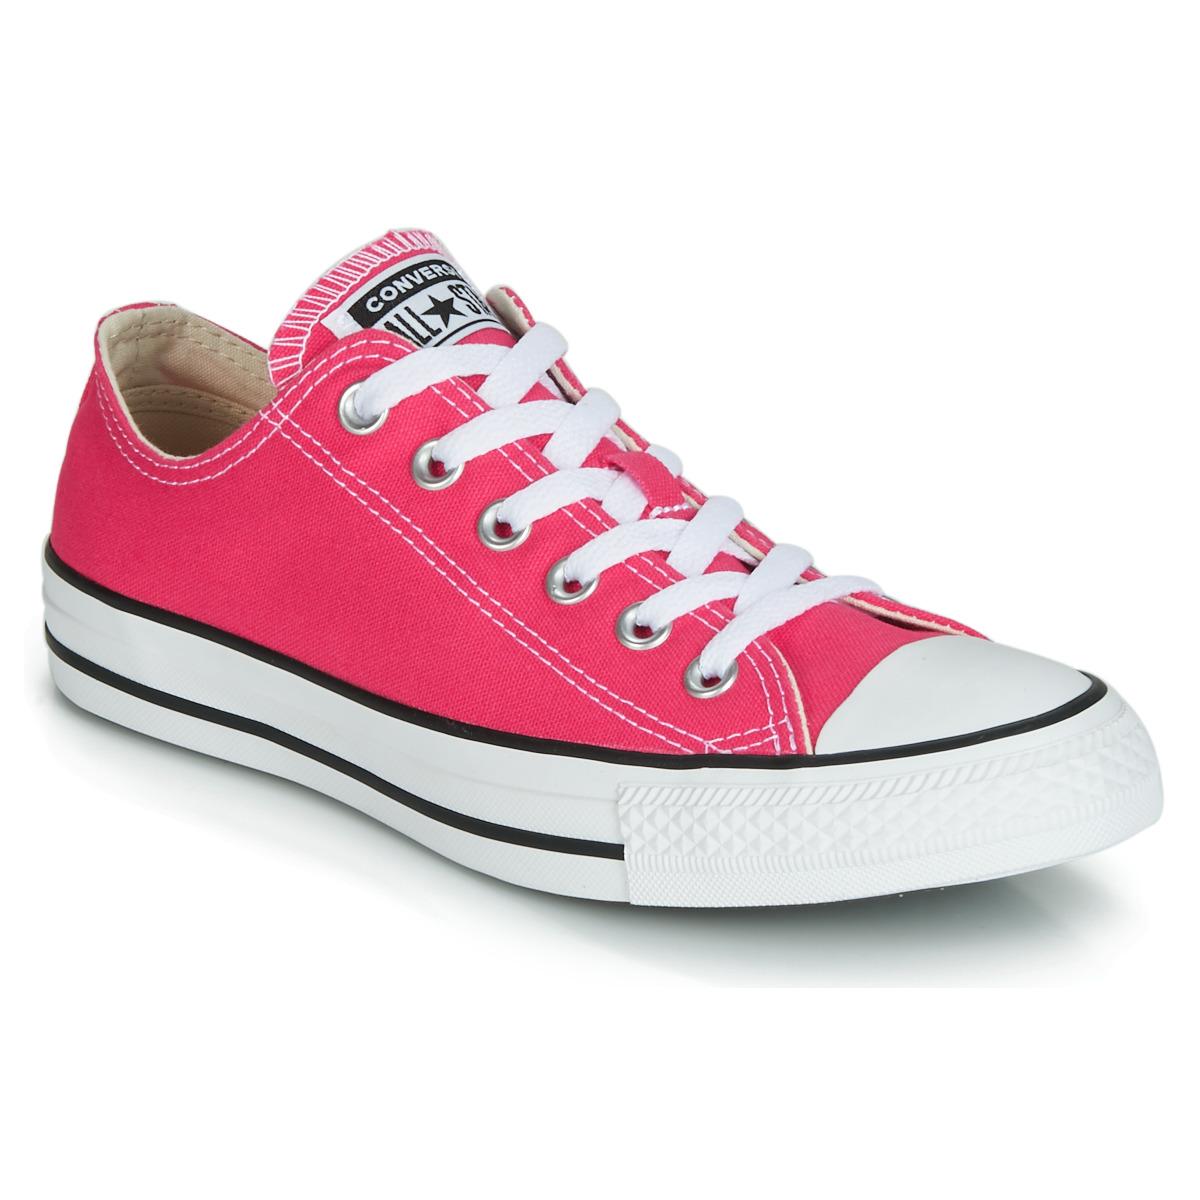 Converse Chuck Taylor All Star Seasonal Color Ox Women's Shoes ...